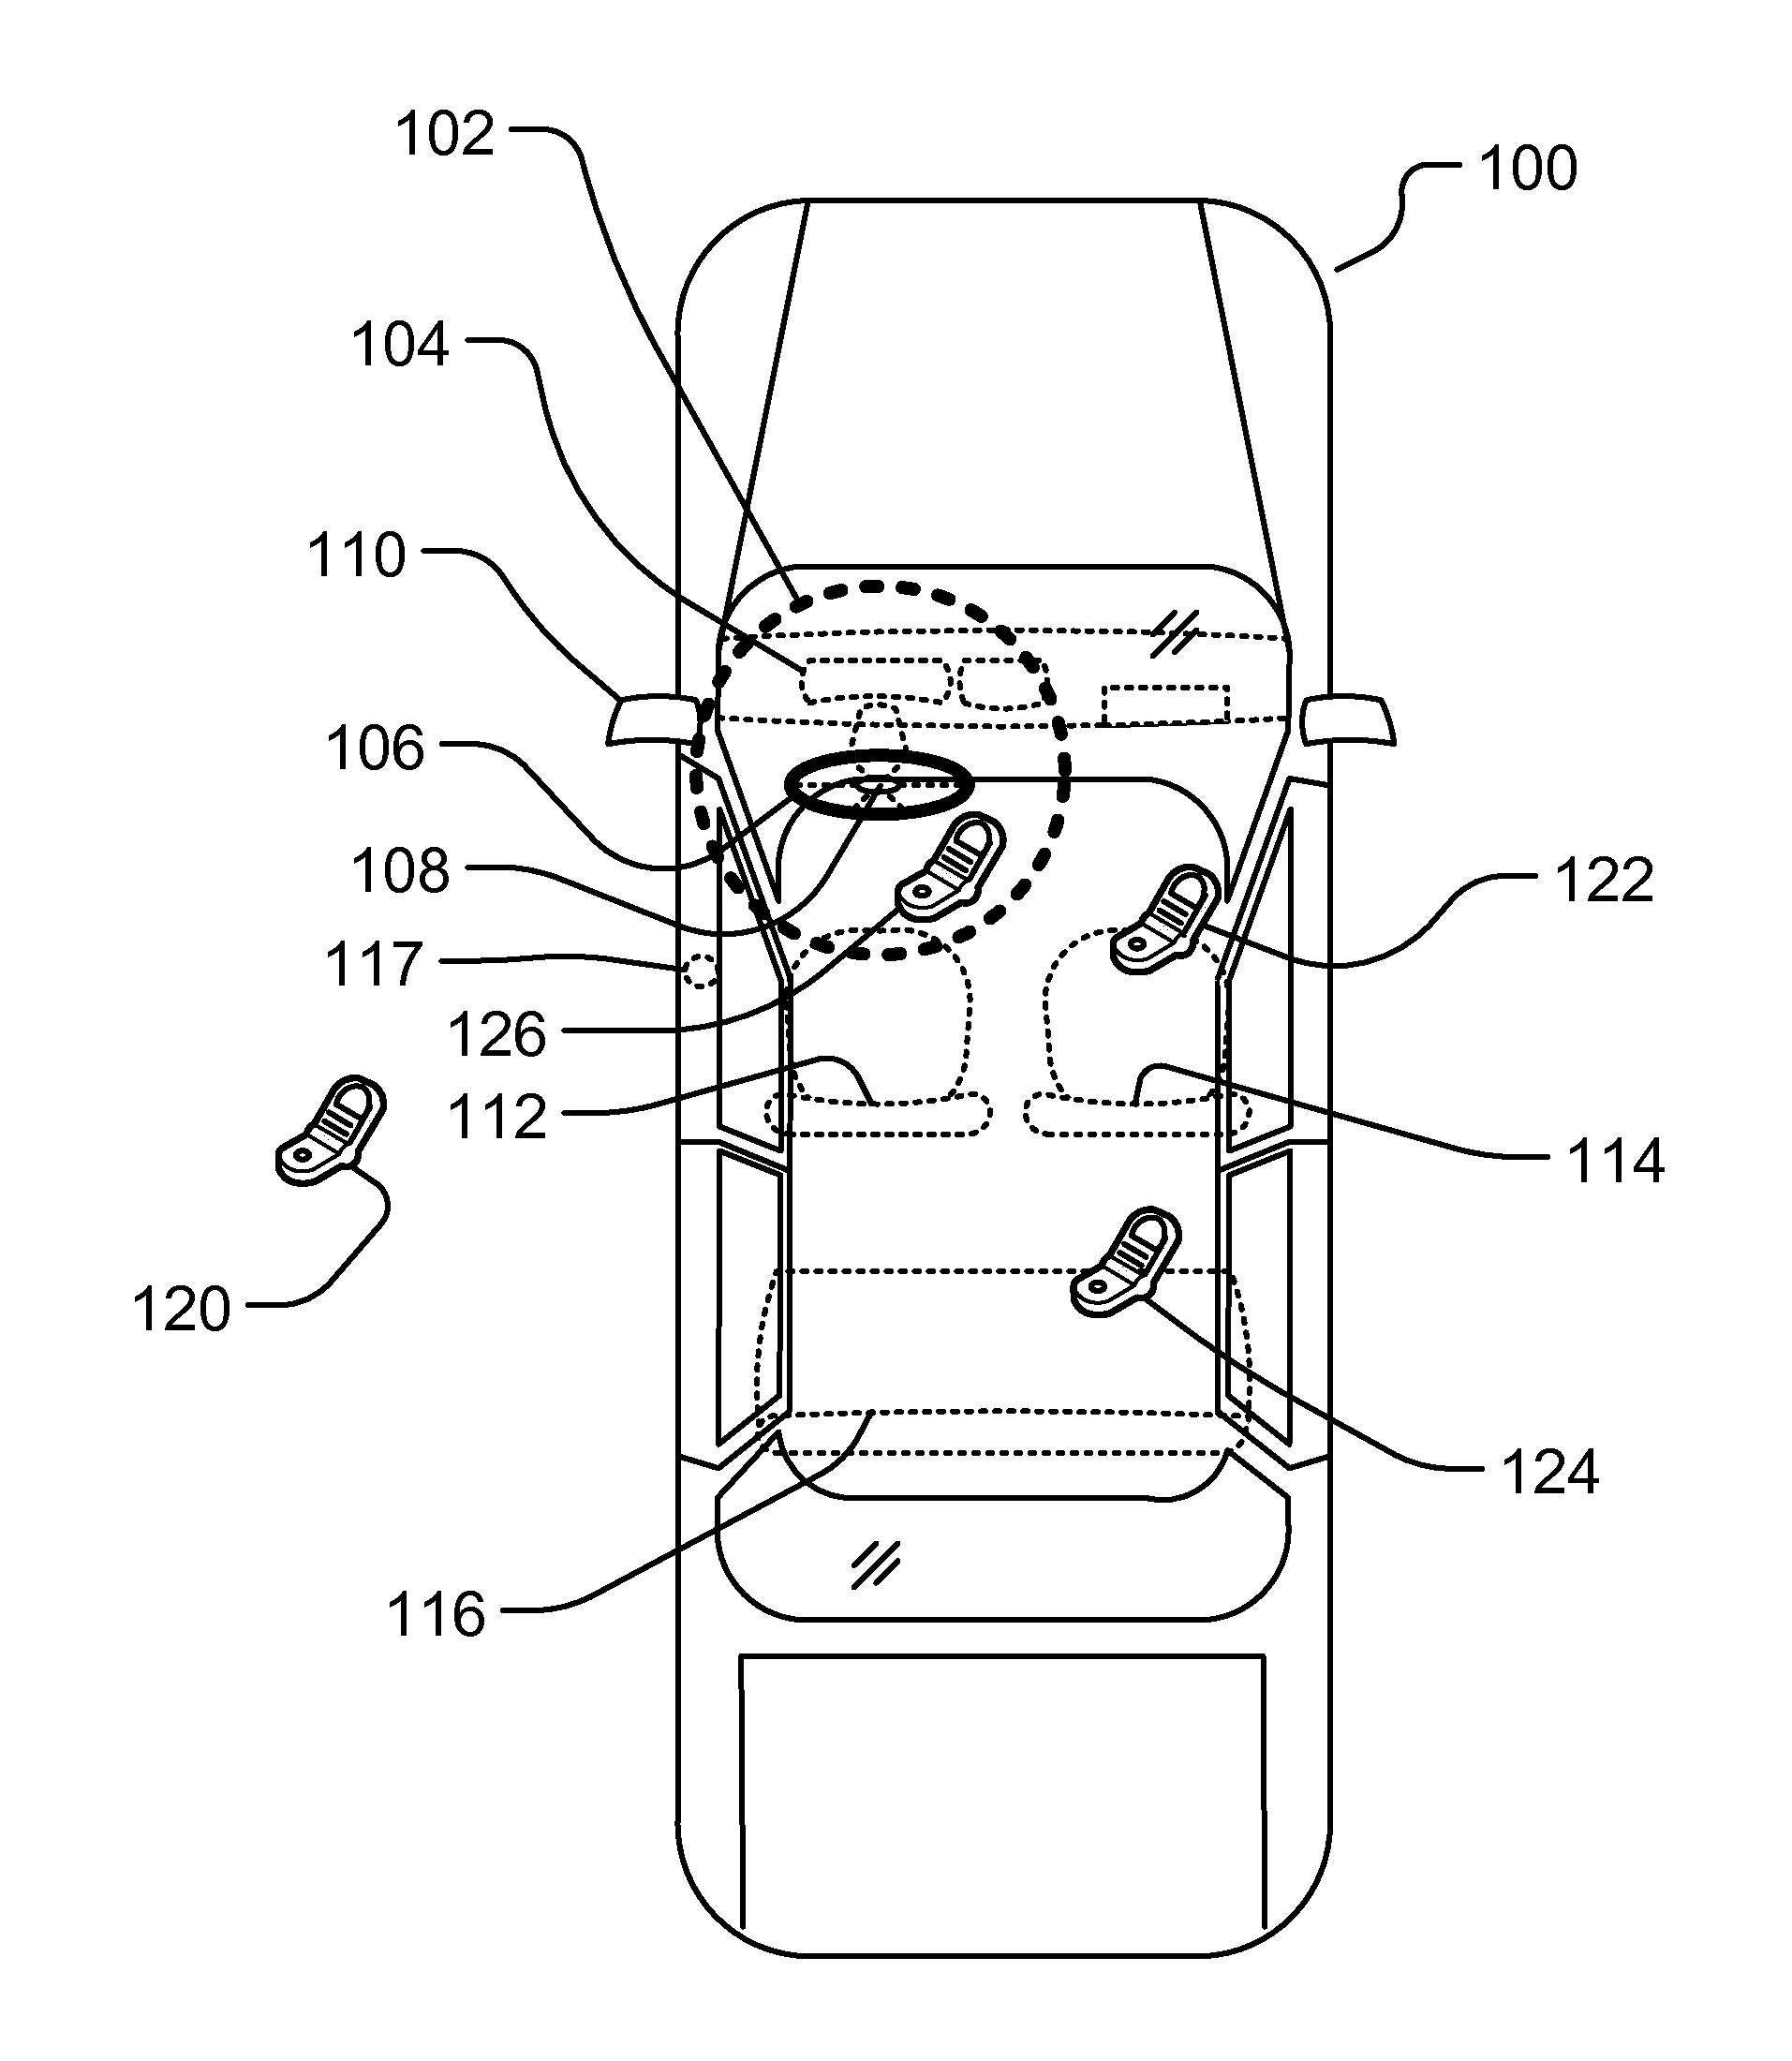 Method and System for Modifying Mobile Device Functions